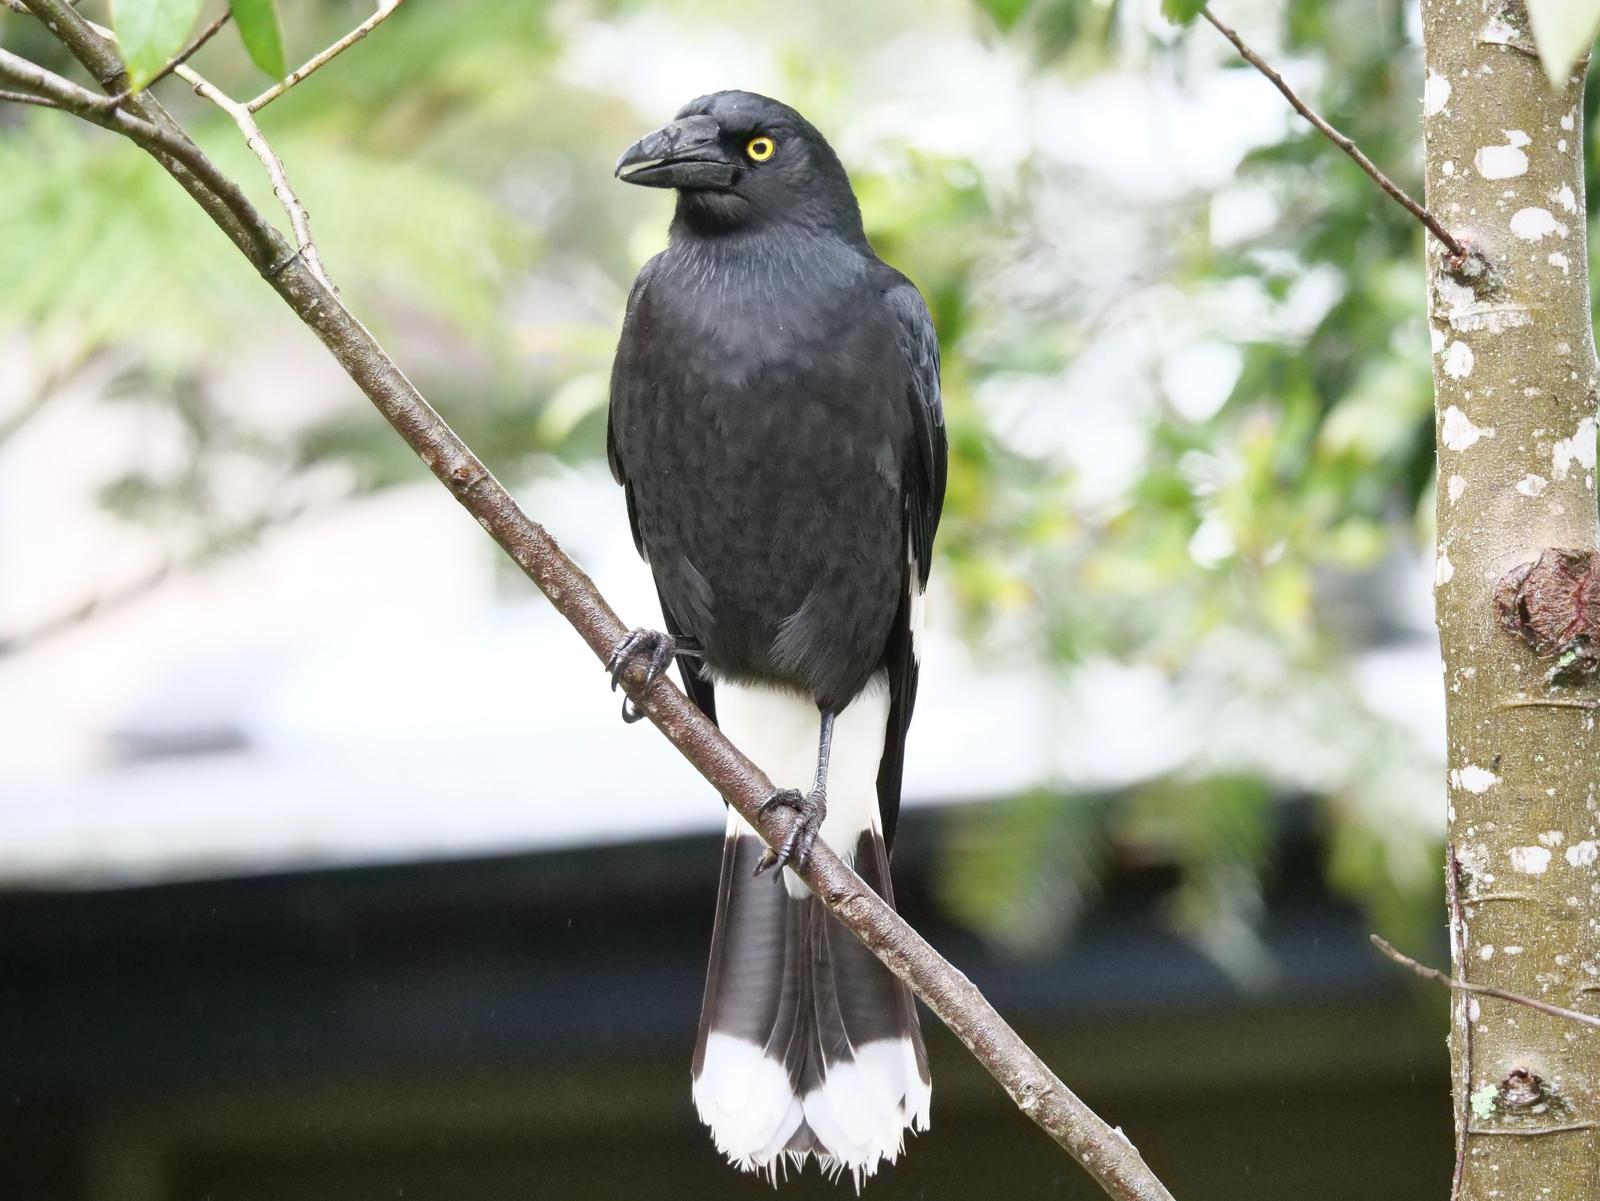 Pied Currawong Photo by Peter Lowe